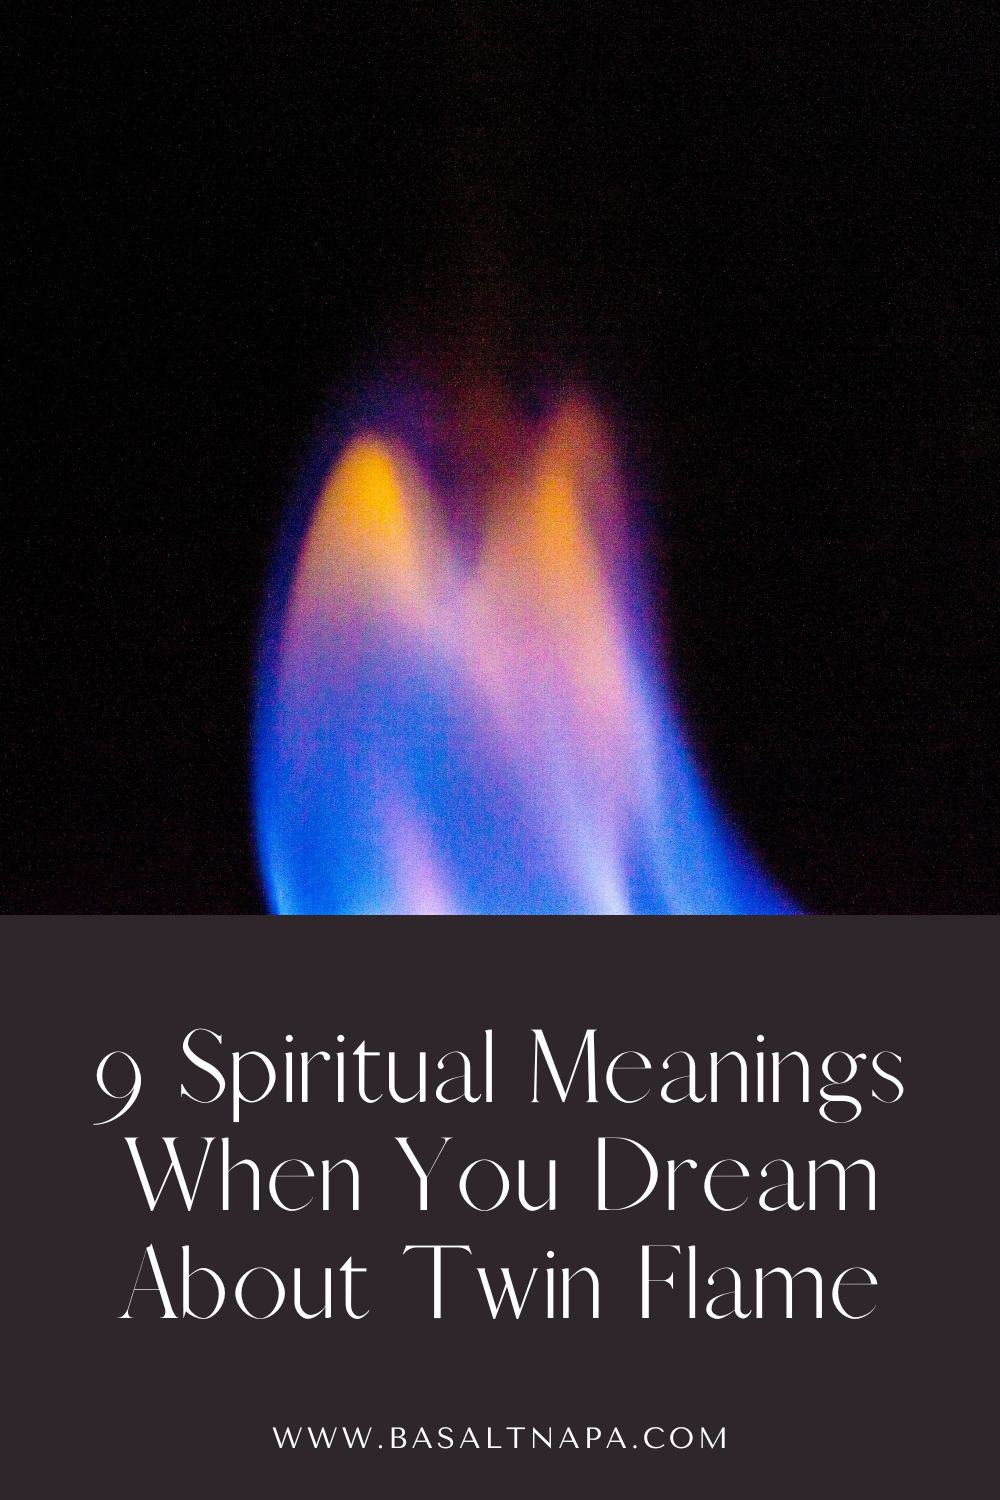 9 Spiritual Meanings When You Dream About Twin Flame